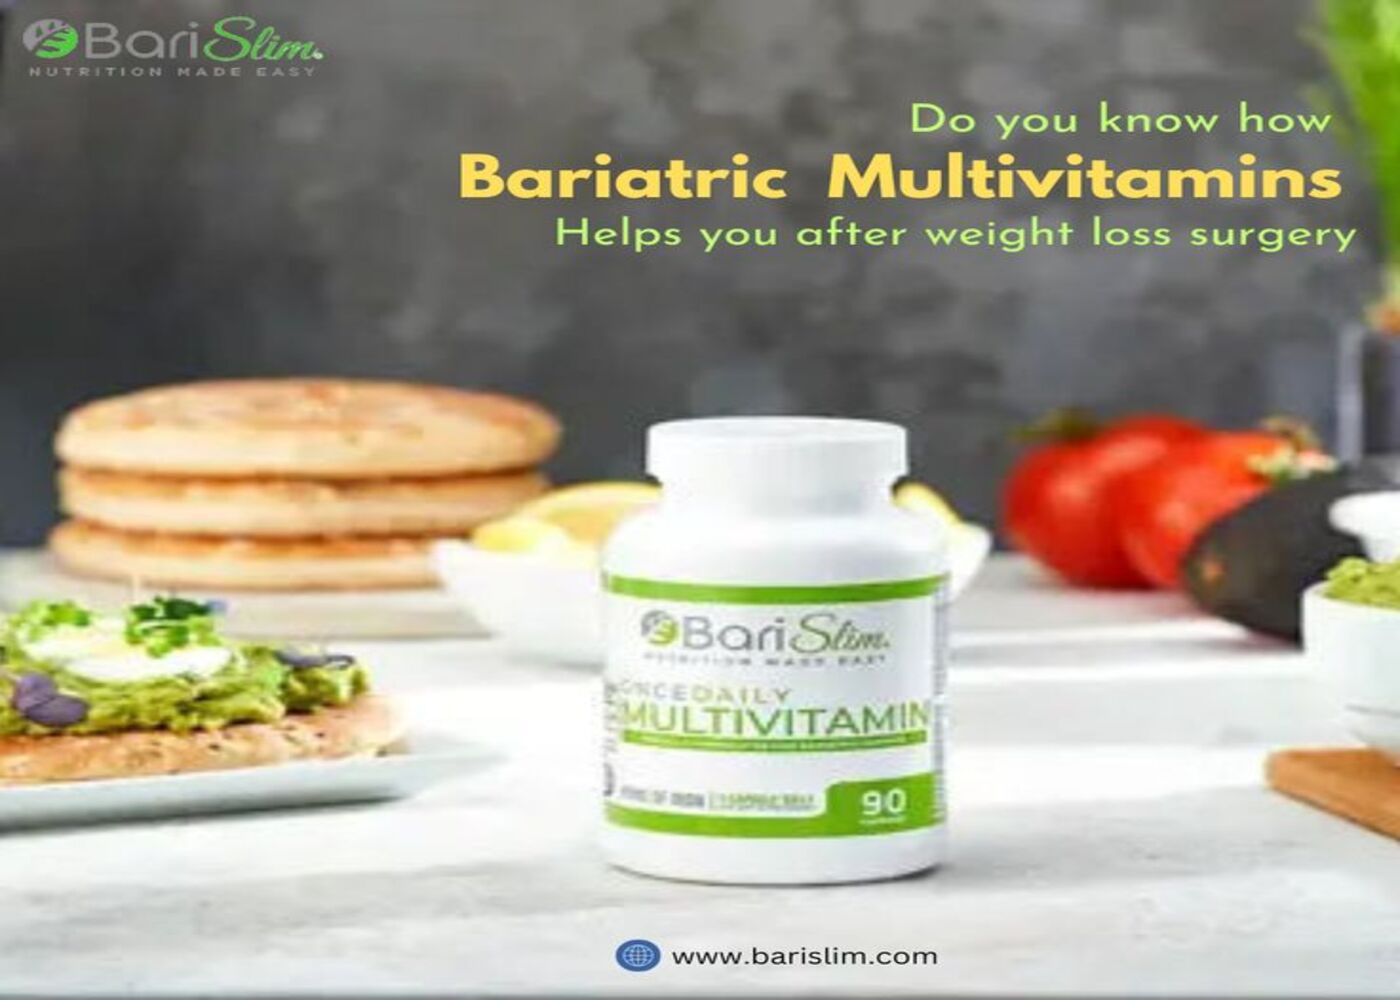 Bariatric Multivitamins With Iron: Essential Nutrients After Bariatric Surgery | Barislim